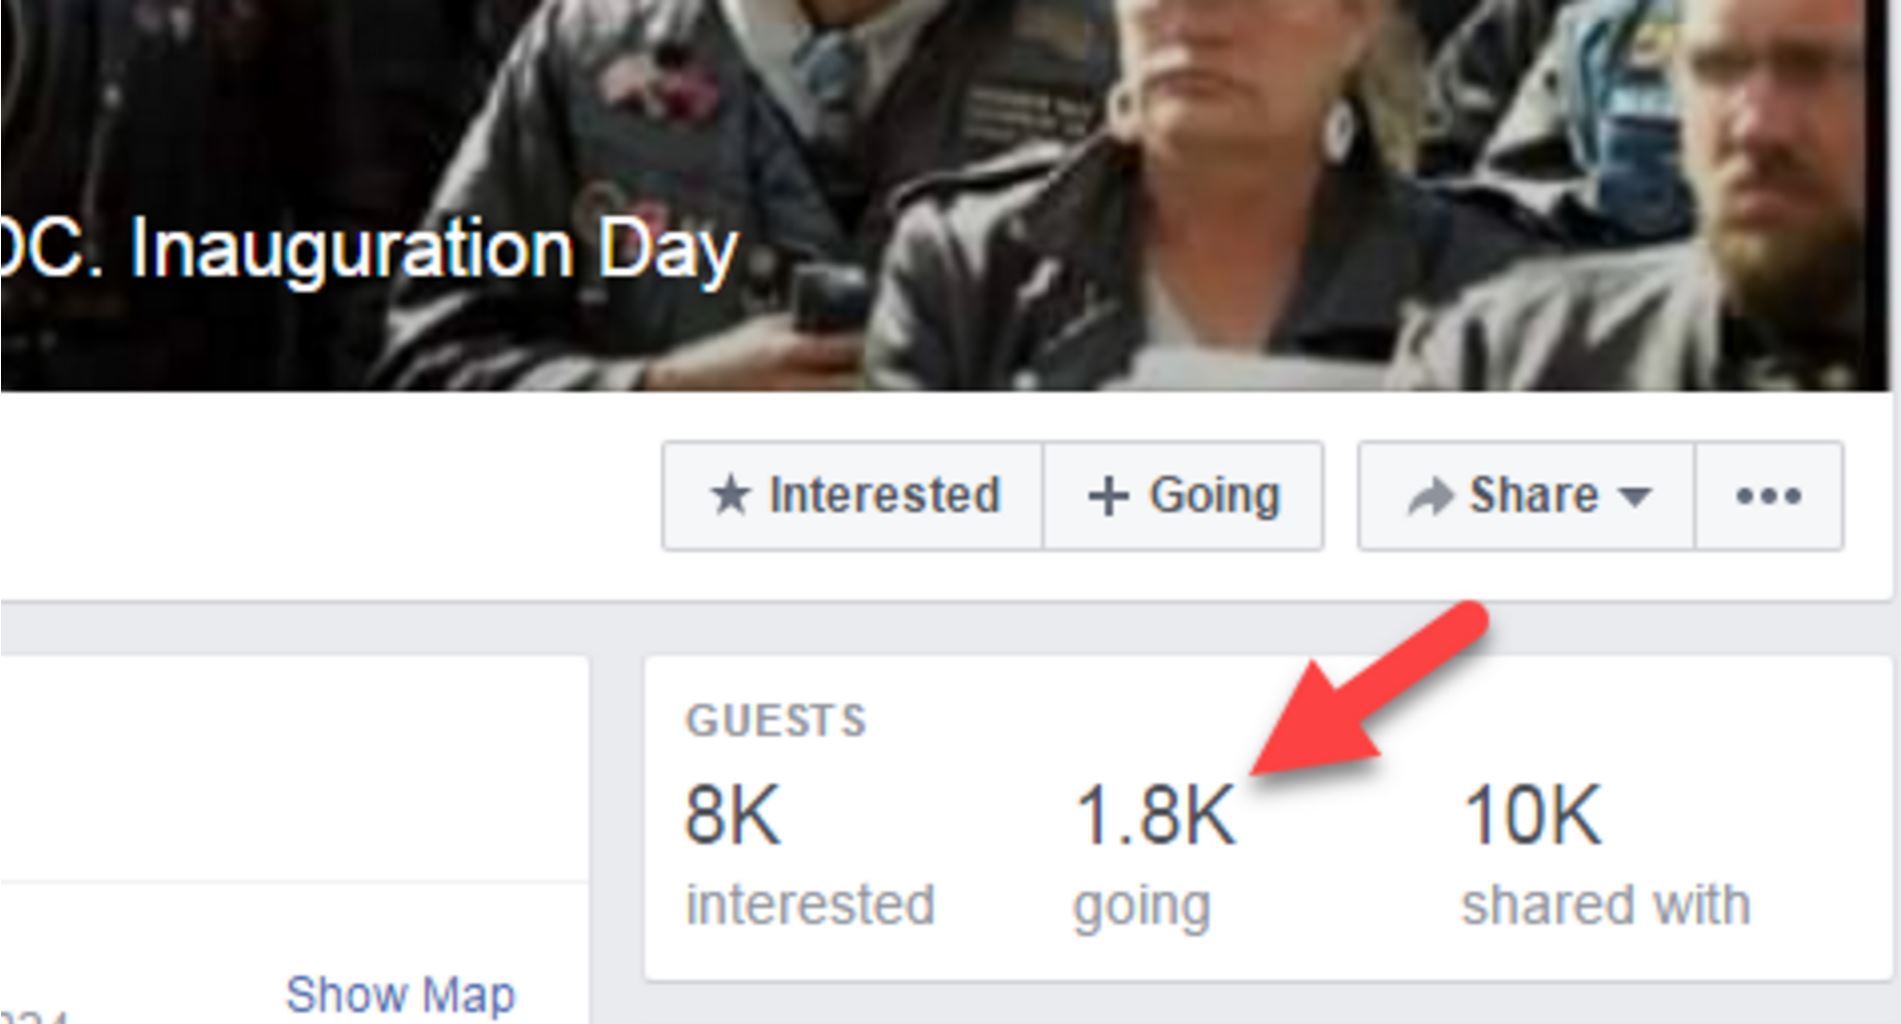 Facebook page showing only 1,800 have indicated that they are going to the biker event. In addition, only 8,000 are interested, and the page has only been shared with 10,000 people total.